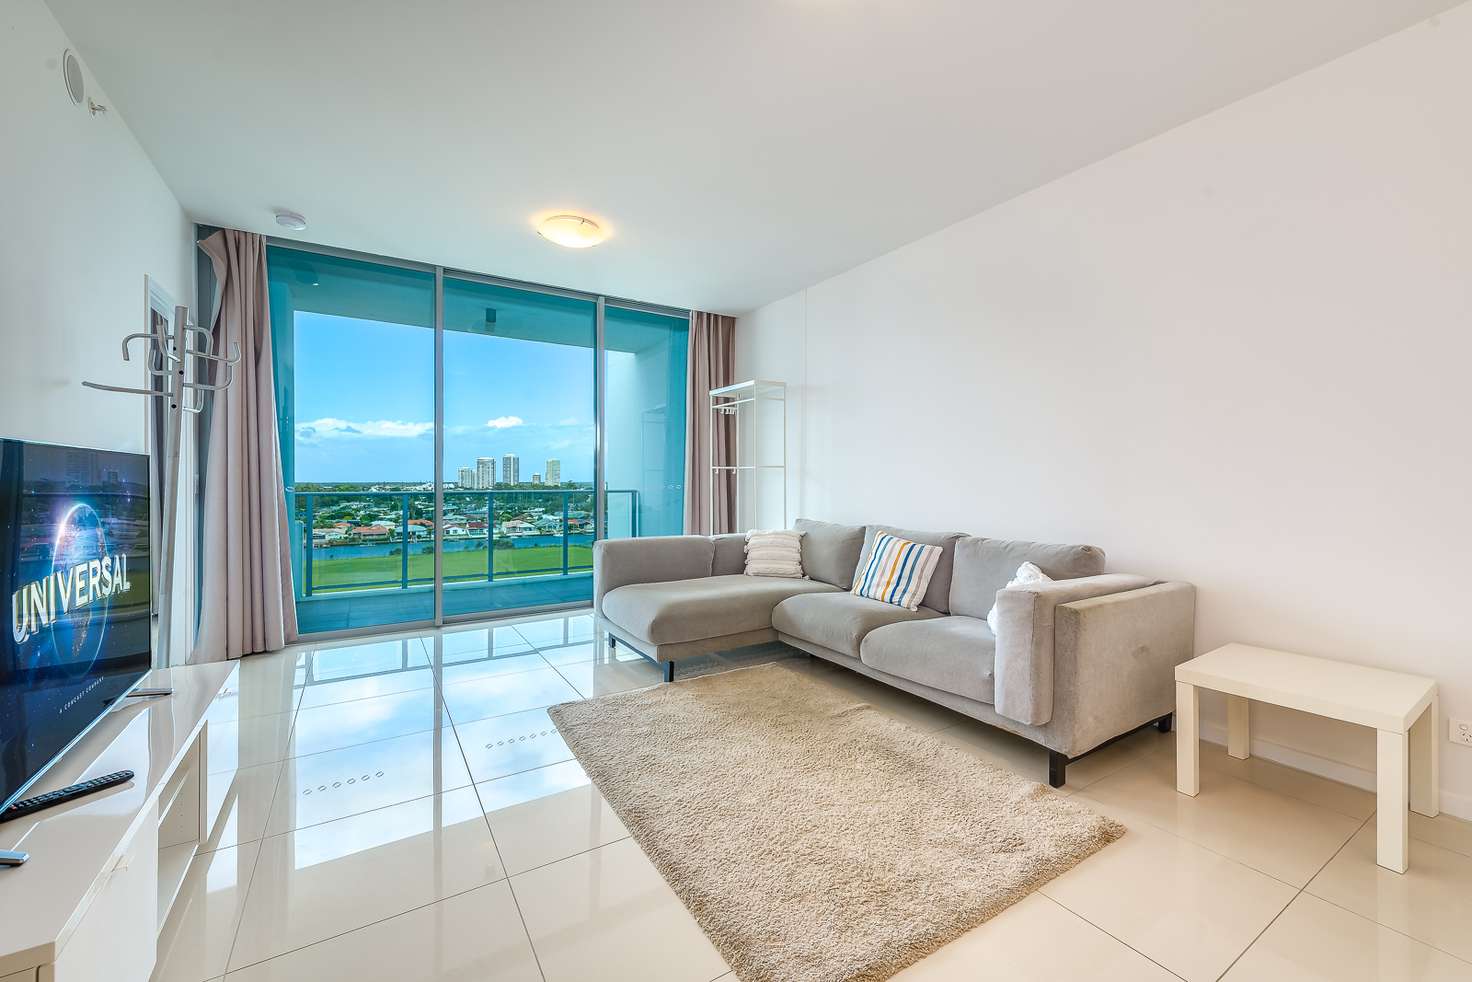 Main view of Homely apartment listing, 3901/25 East Quay Drive, Biggera Waters QLD 4216